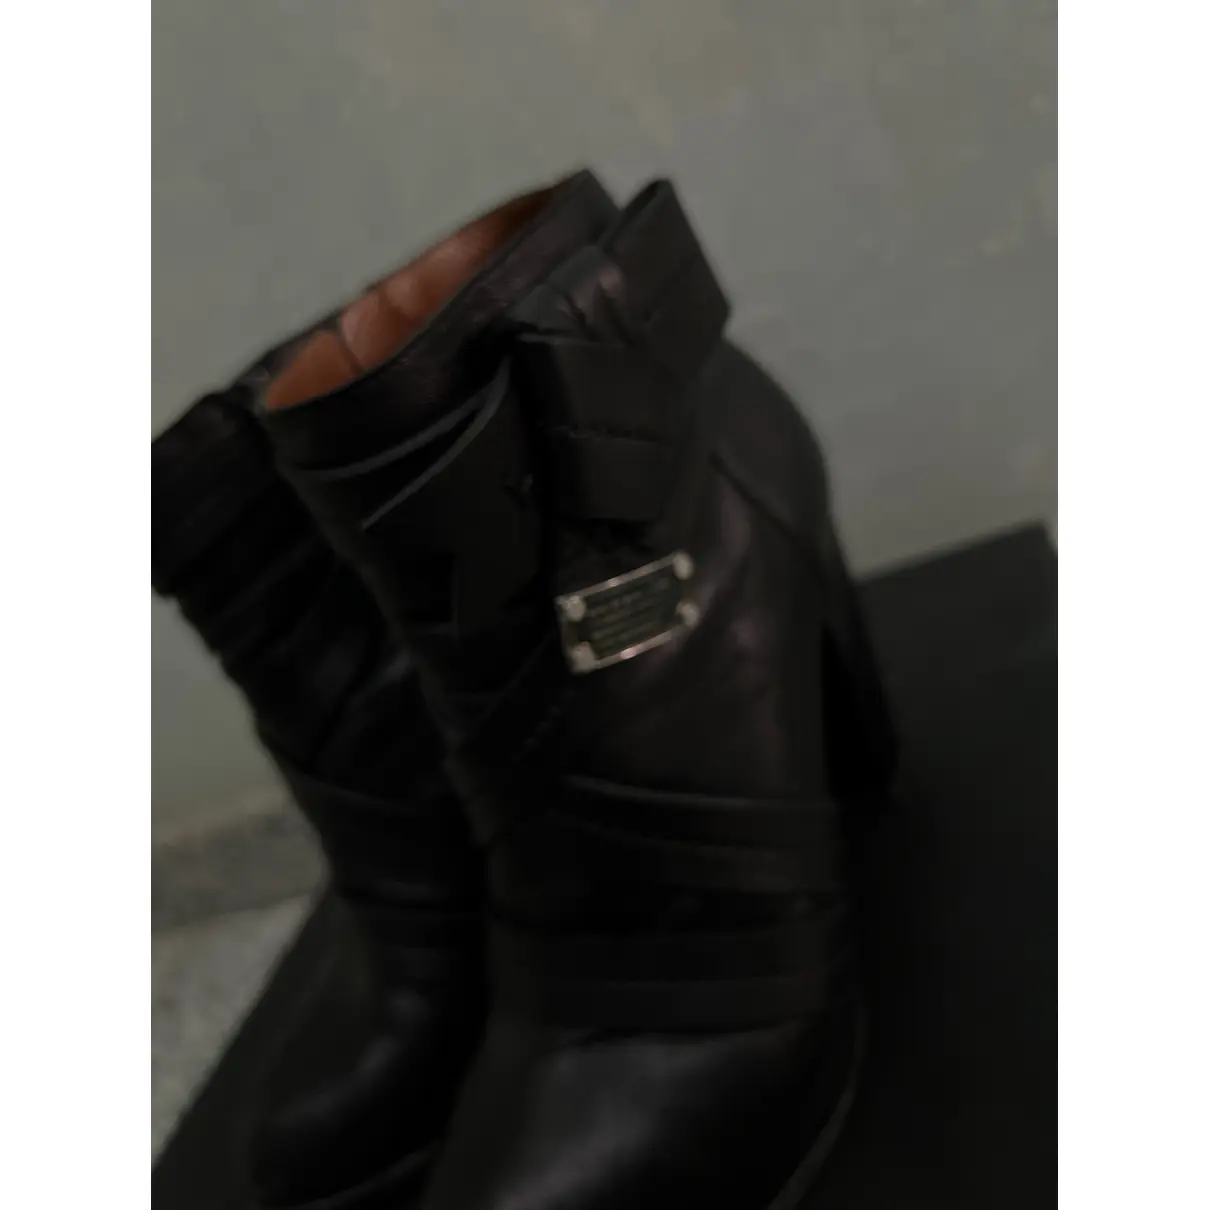 Luxury Marc by Marc Jacobs Ankle boots Women